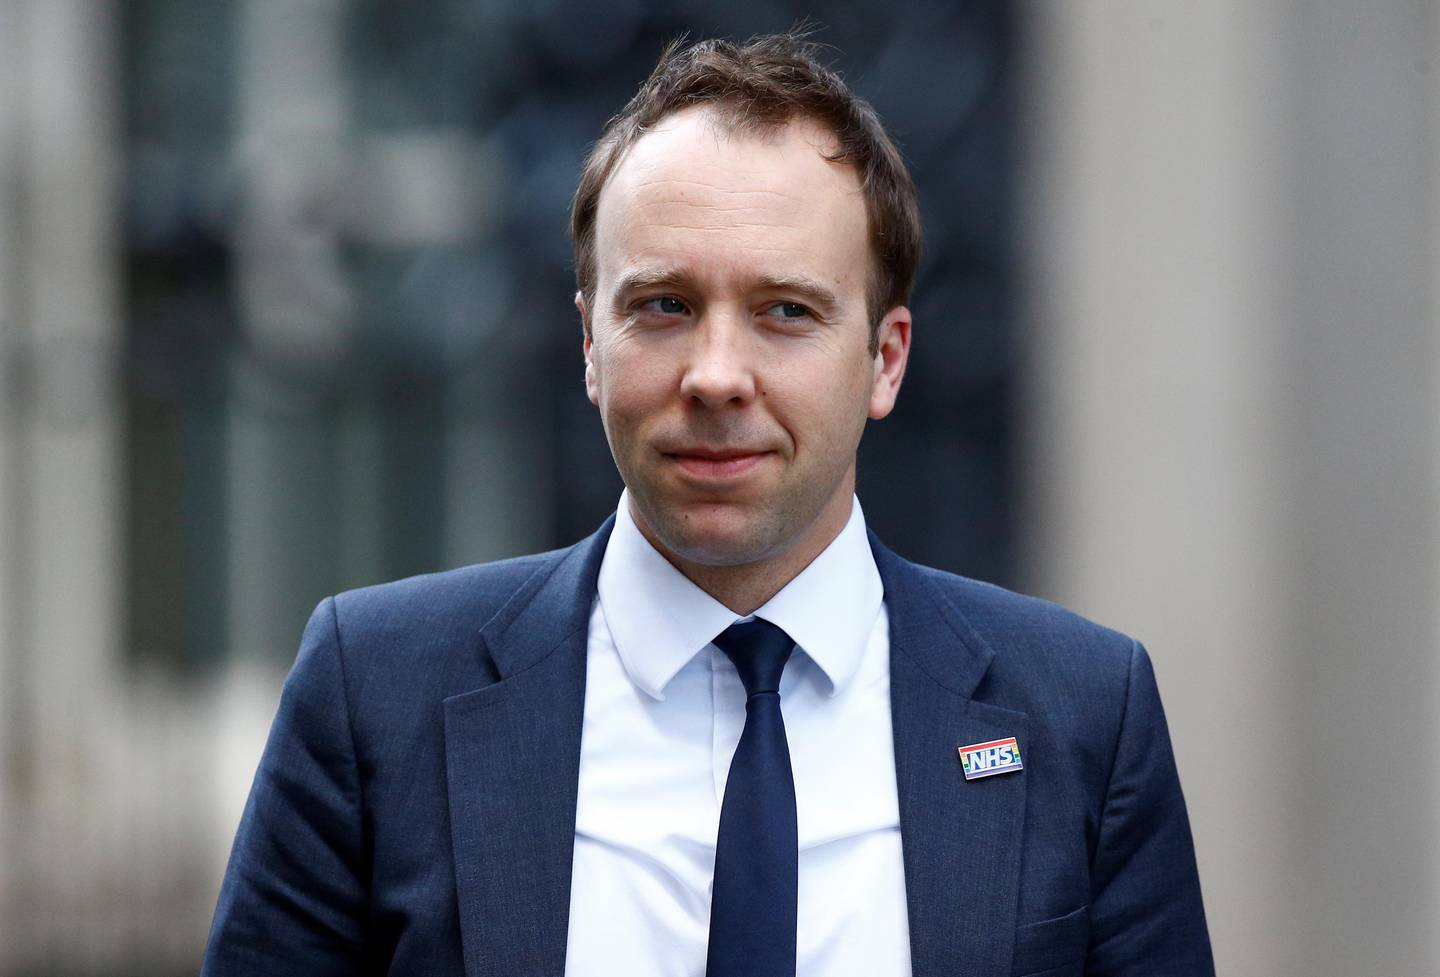 Britain's Secretary of State for Health Matt Hancock is seen outside Downing Street in London, Britain March 14, 2019. REUTERS/Henry Nicholls